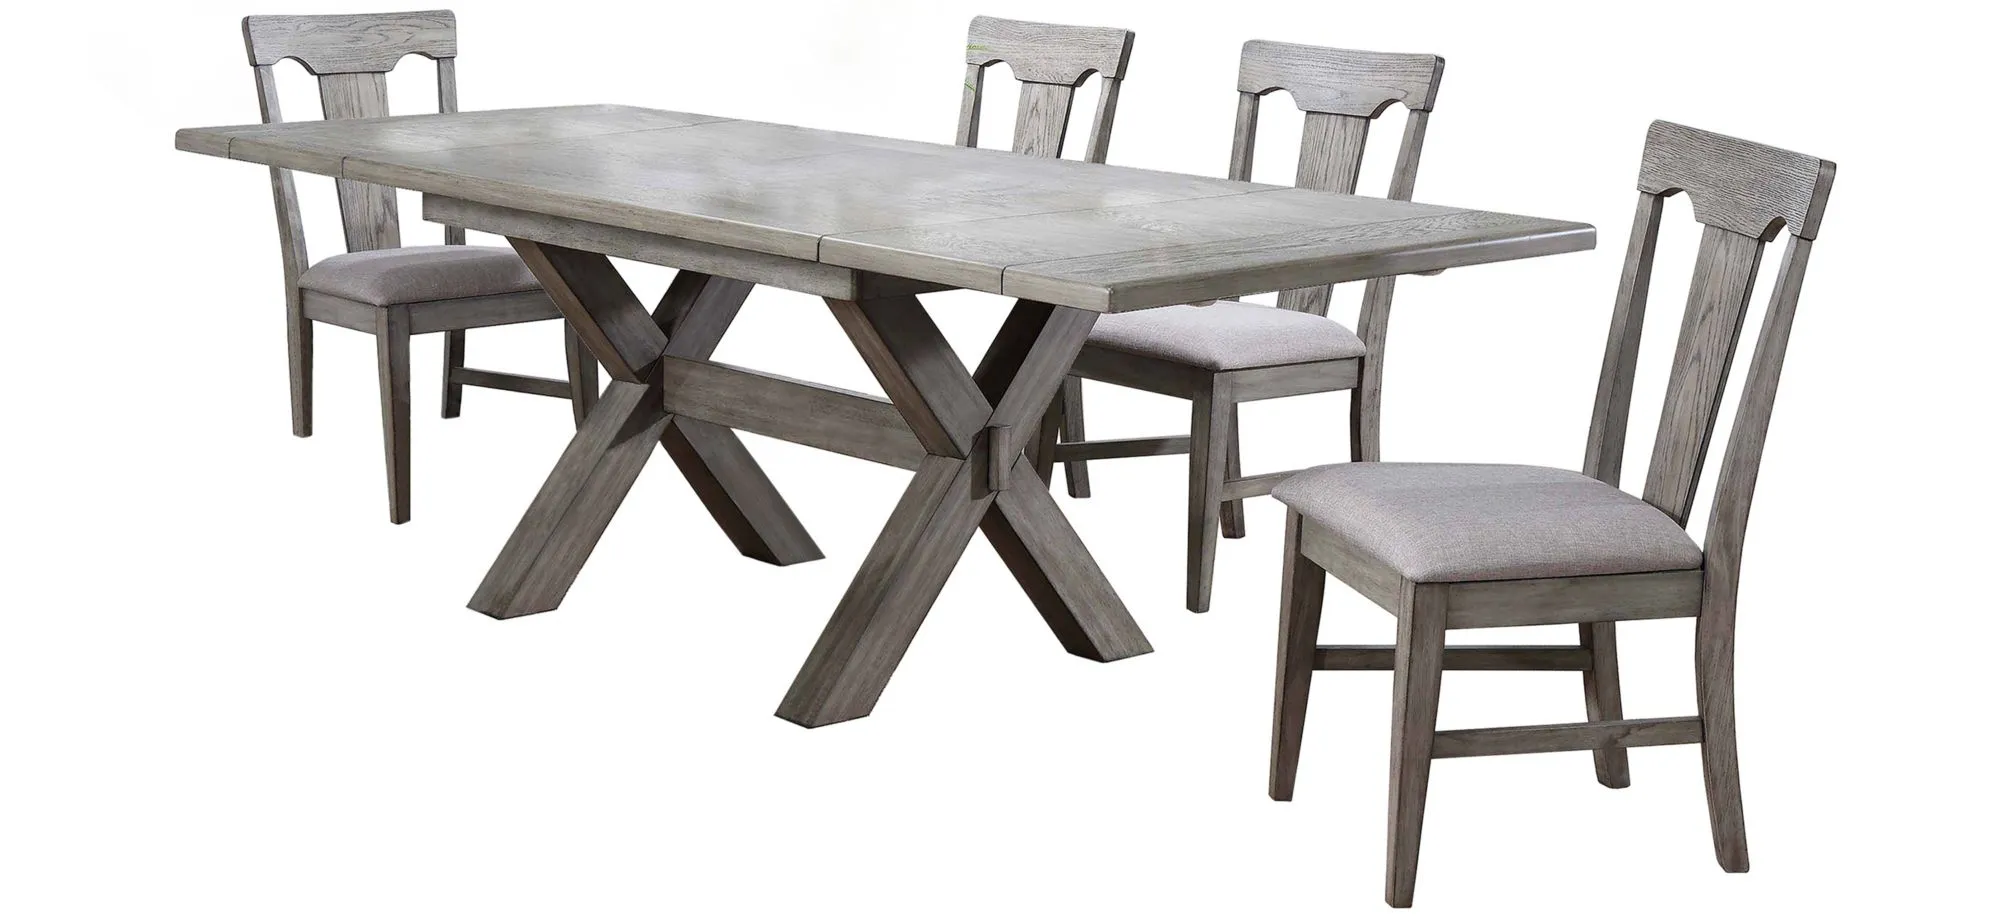 Graystone 7-pc. Dining Set in Burnished Gray by ECI